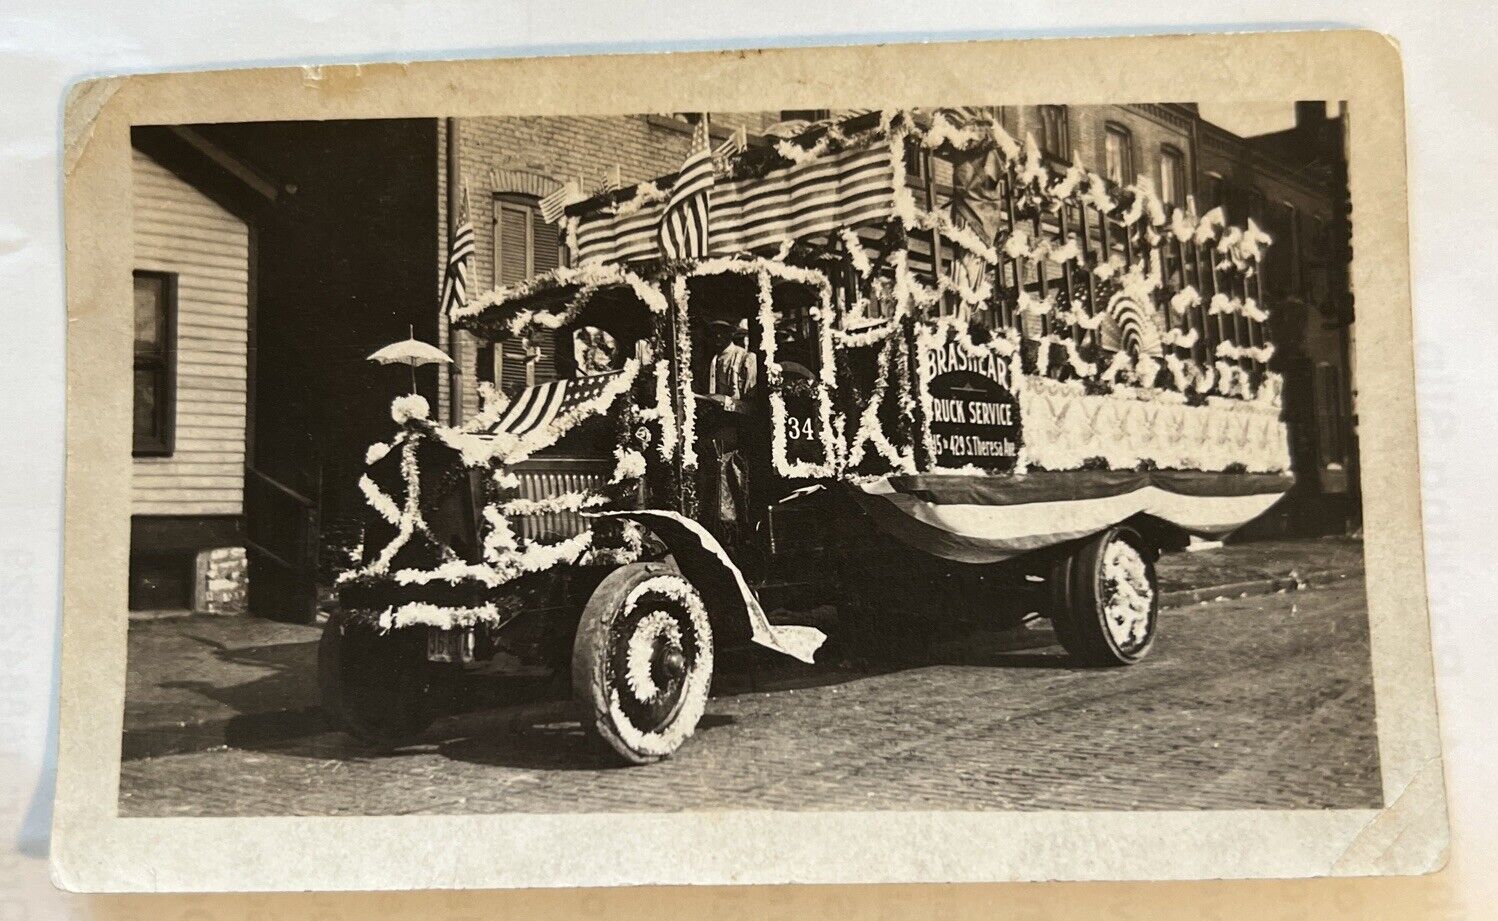 1920s 4th Of July Parade Float Brashear Truck Service Theresa Ave St Louis Mo